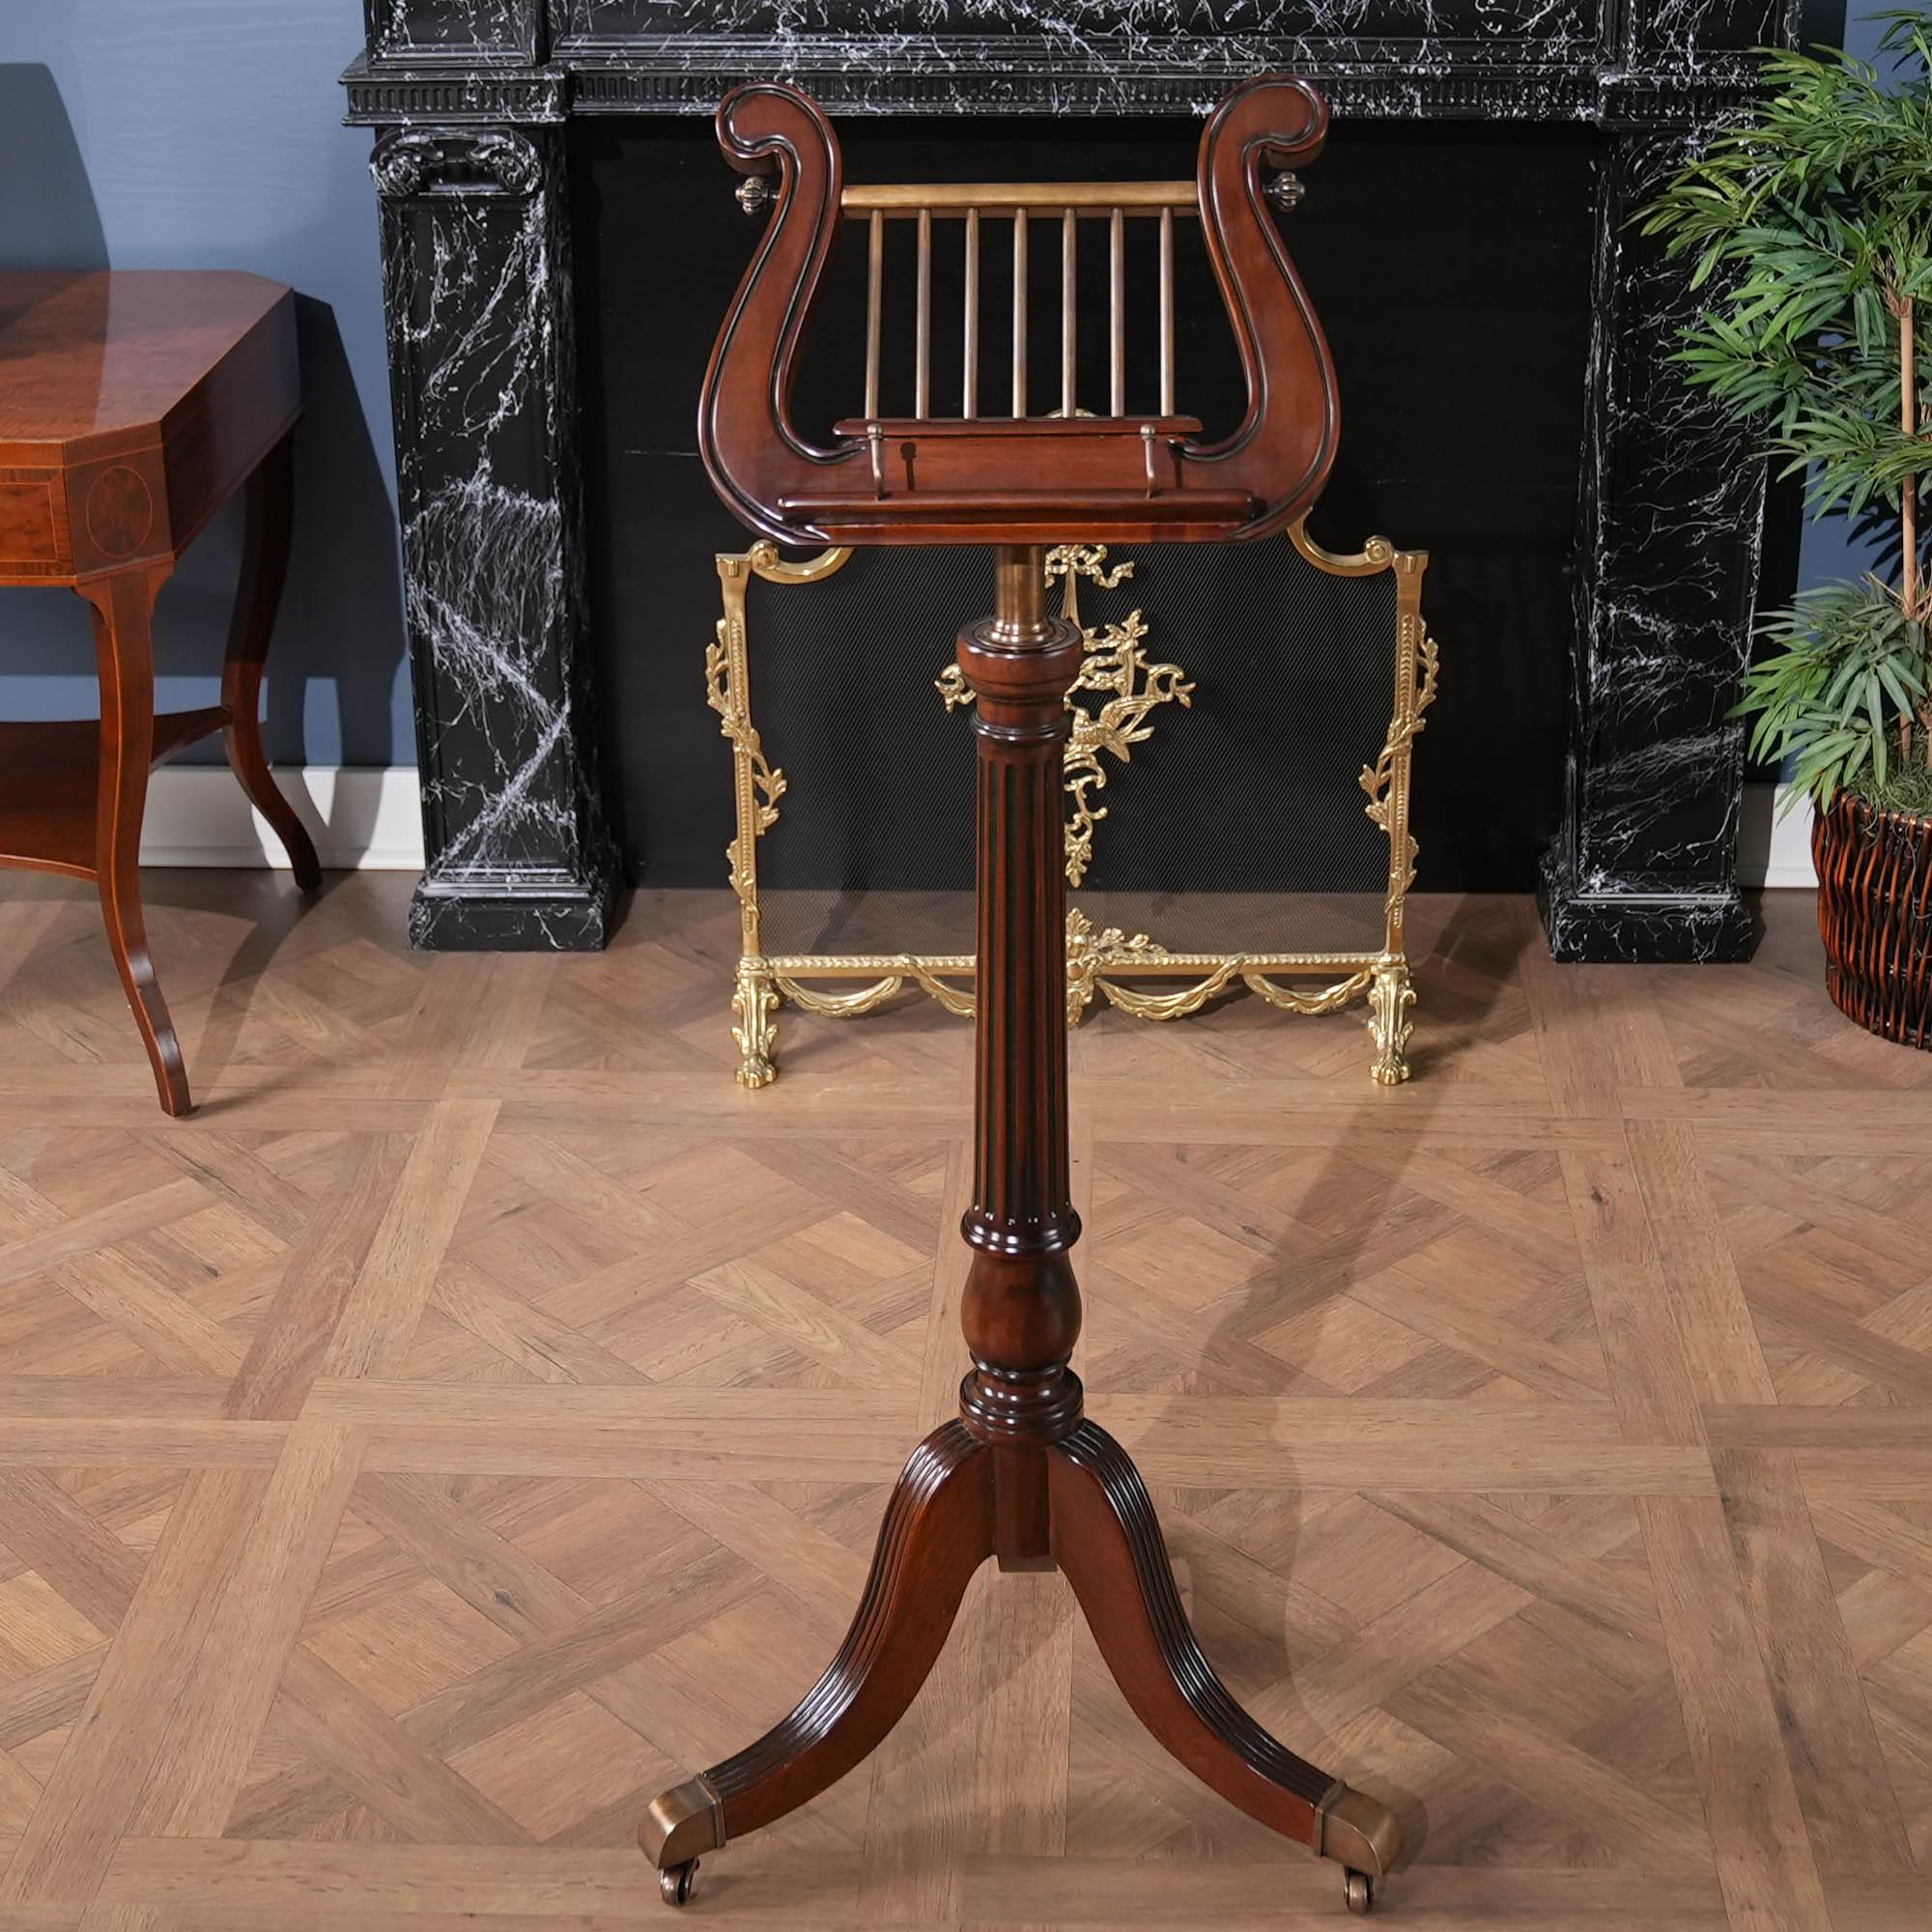 For the music lover this solid mahogany and brass Lyre or Harp Music Stand rivals any antique music stand in terms of beauty and quality. Adjustable in height, beautifully designed and tastefully finished it will be certain to be treasured for